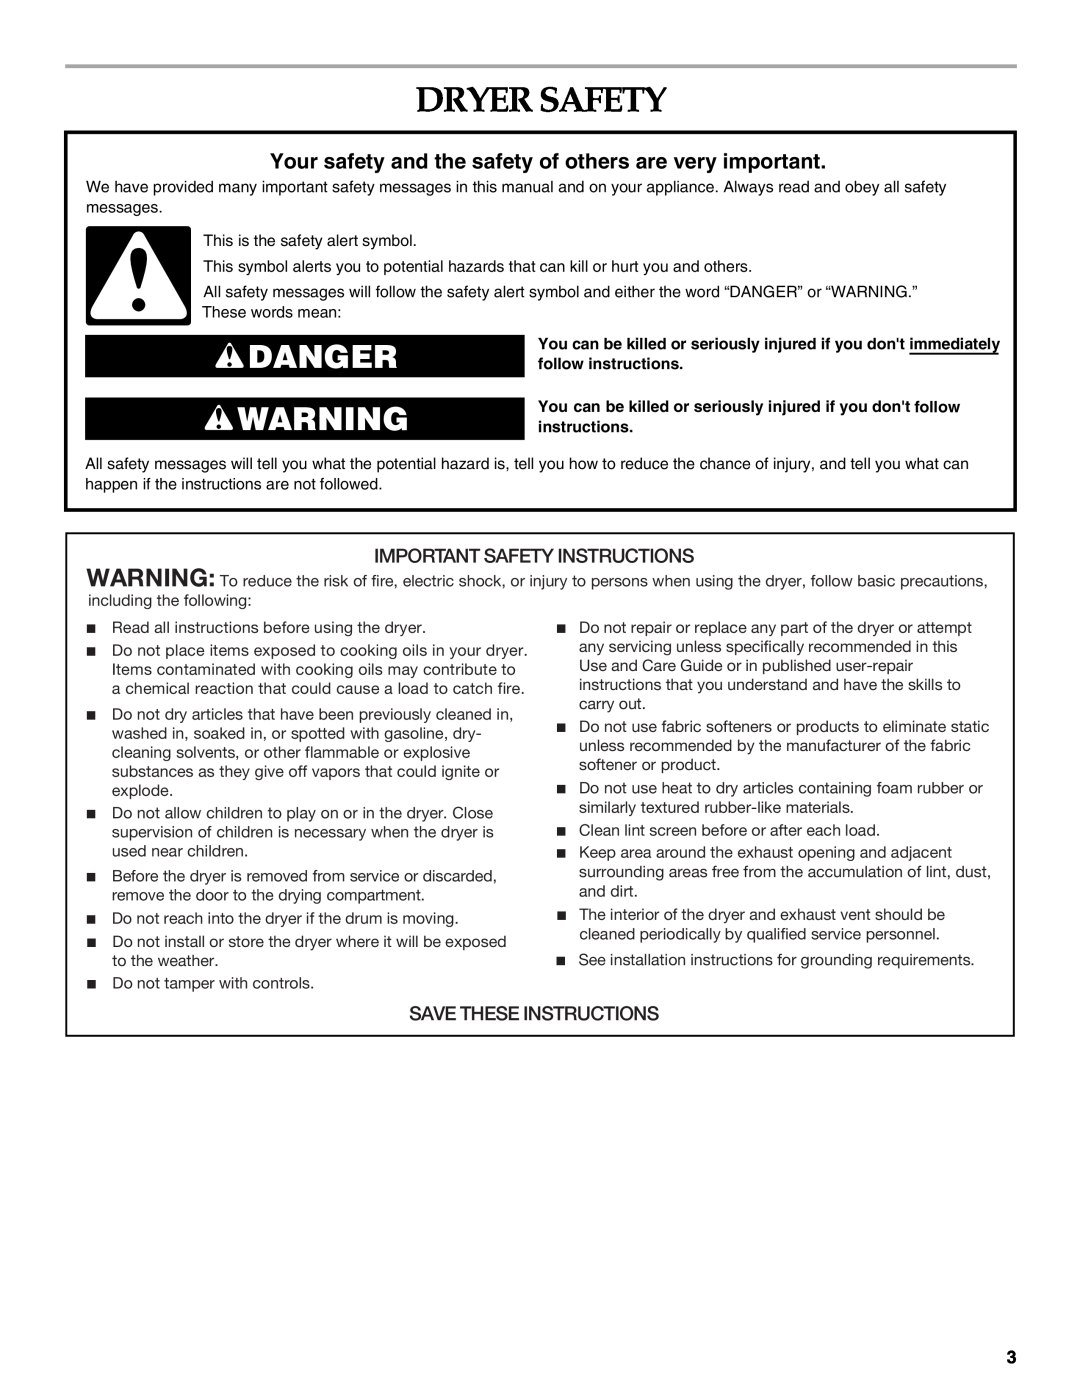 Maytag W10099070 Dryer Safety, Danger, Your safety and the safety of others are very important, Save These Instructions 